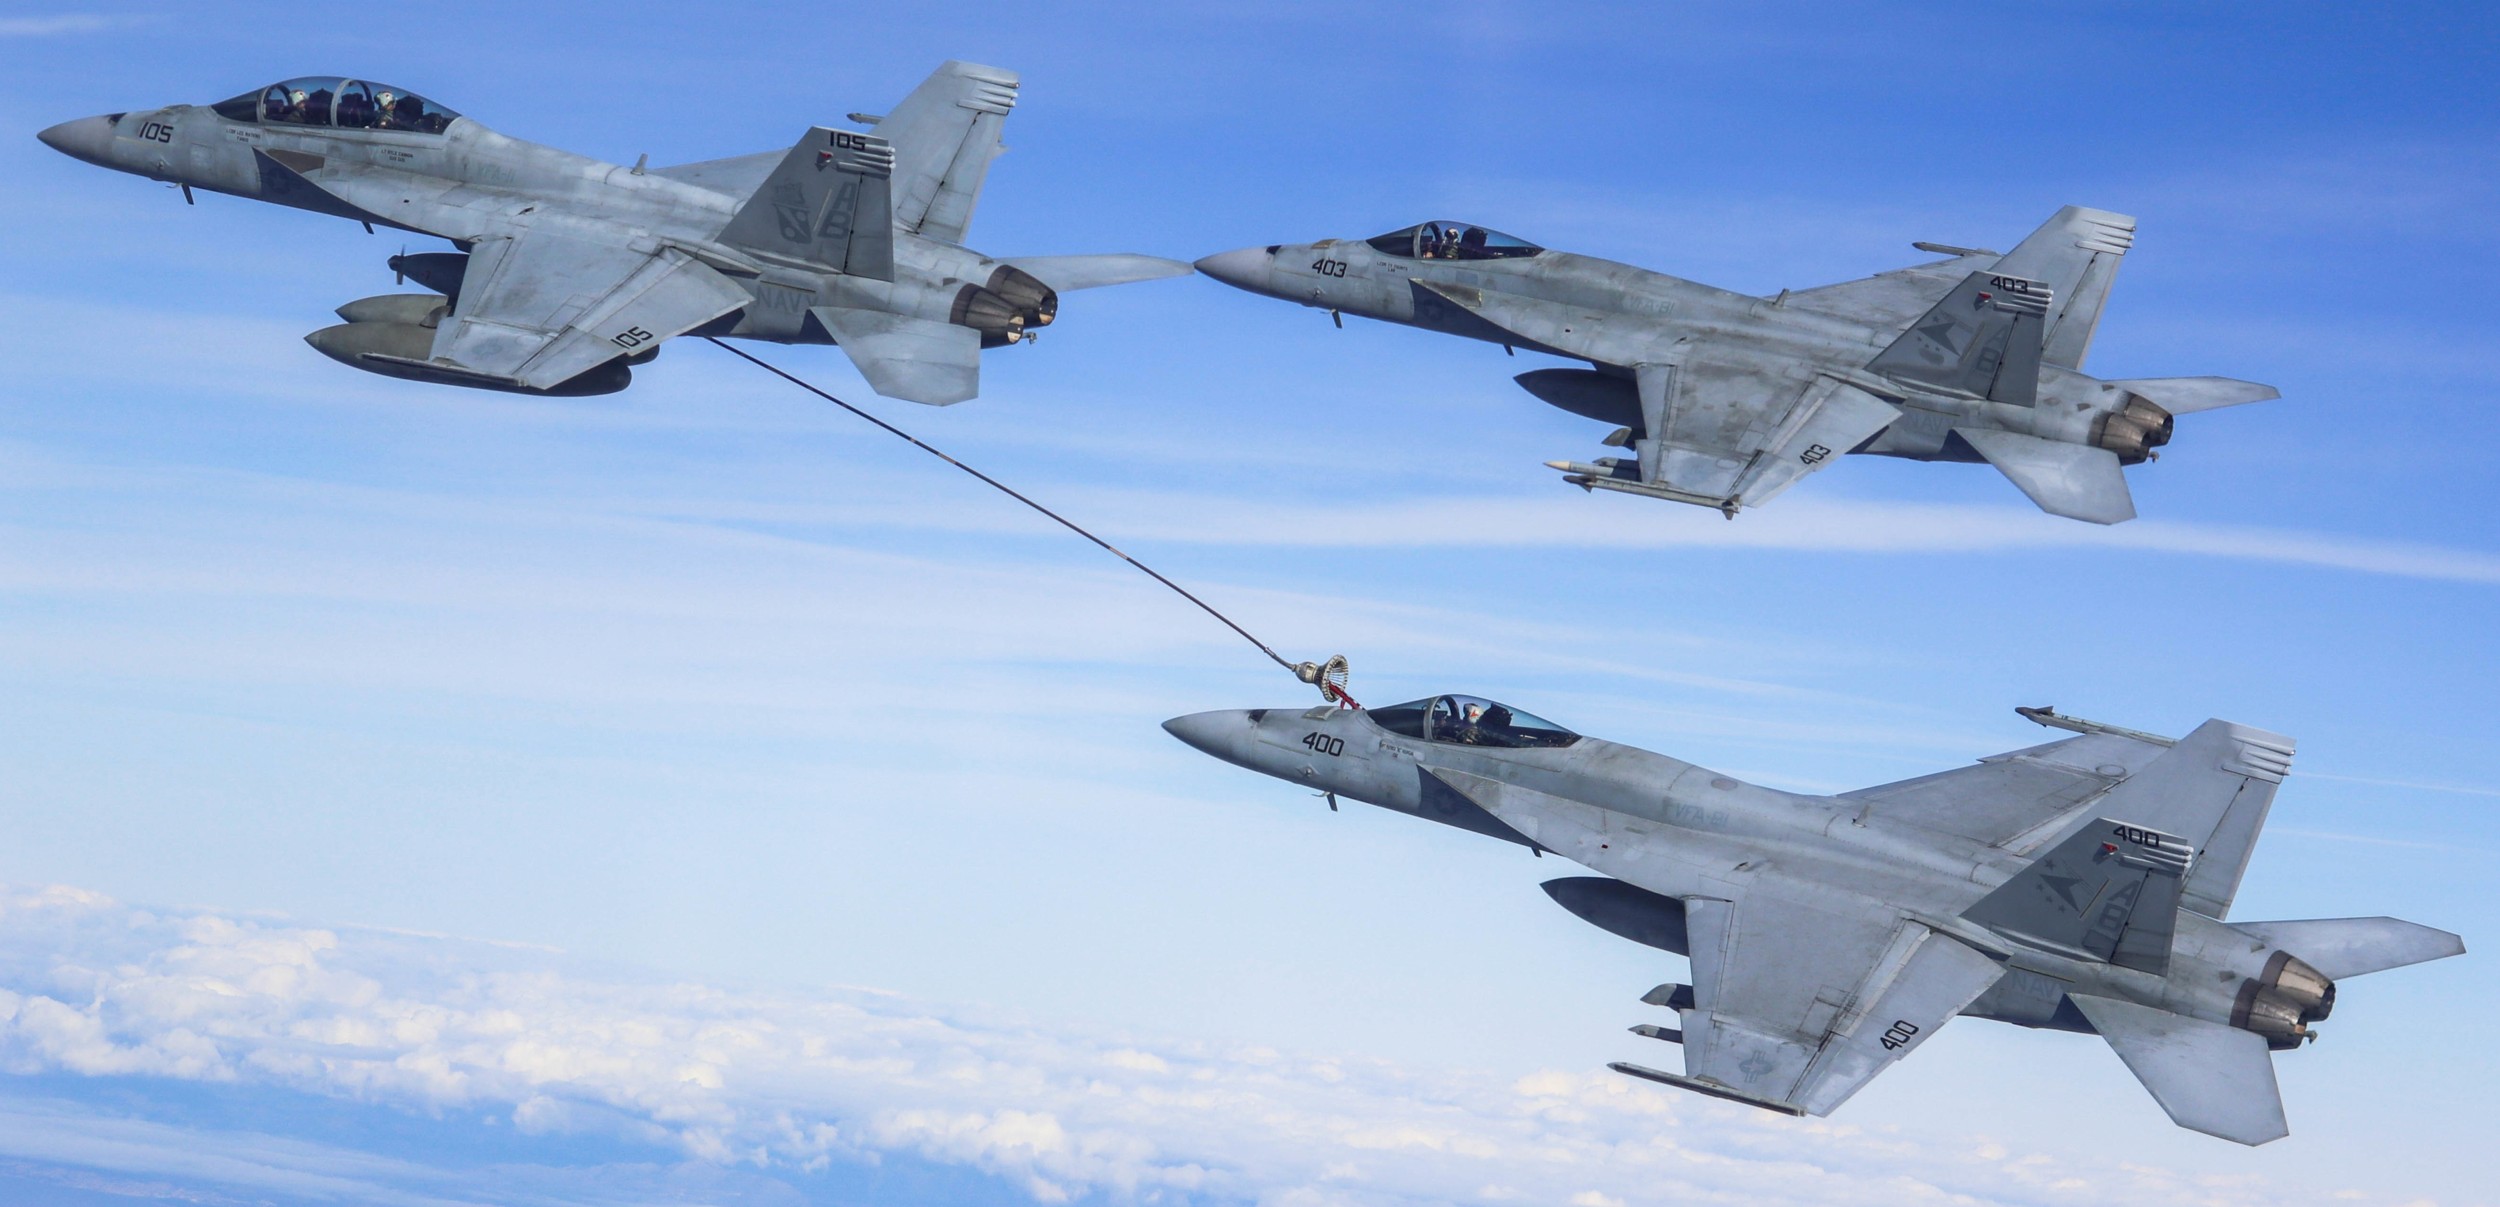 vfa-11 red rippers strike fighter squadron us navy f/a-18f super hornet uss harry s. truman cvn-75 inflight refueling 106